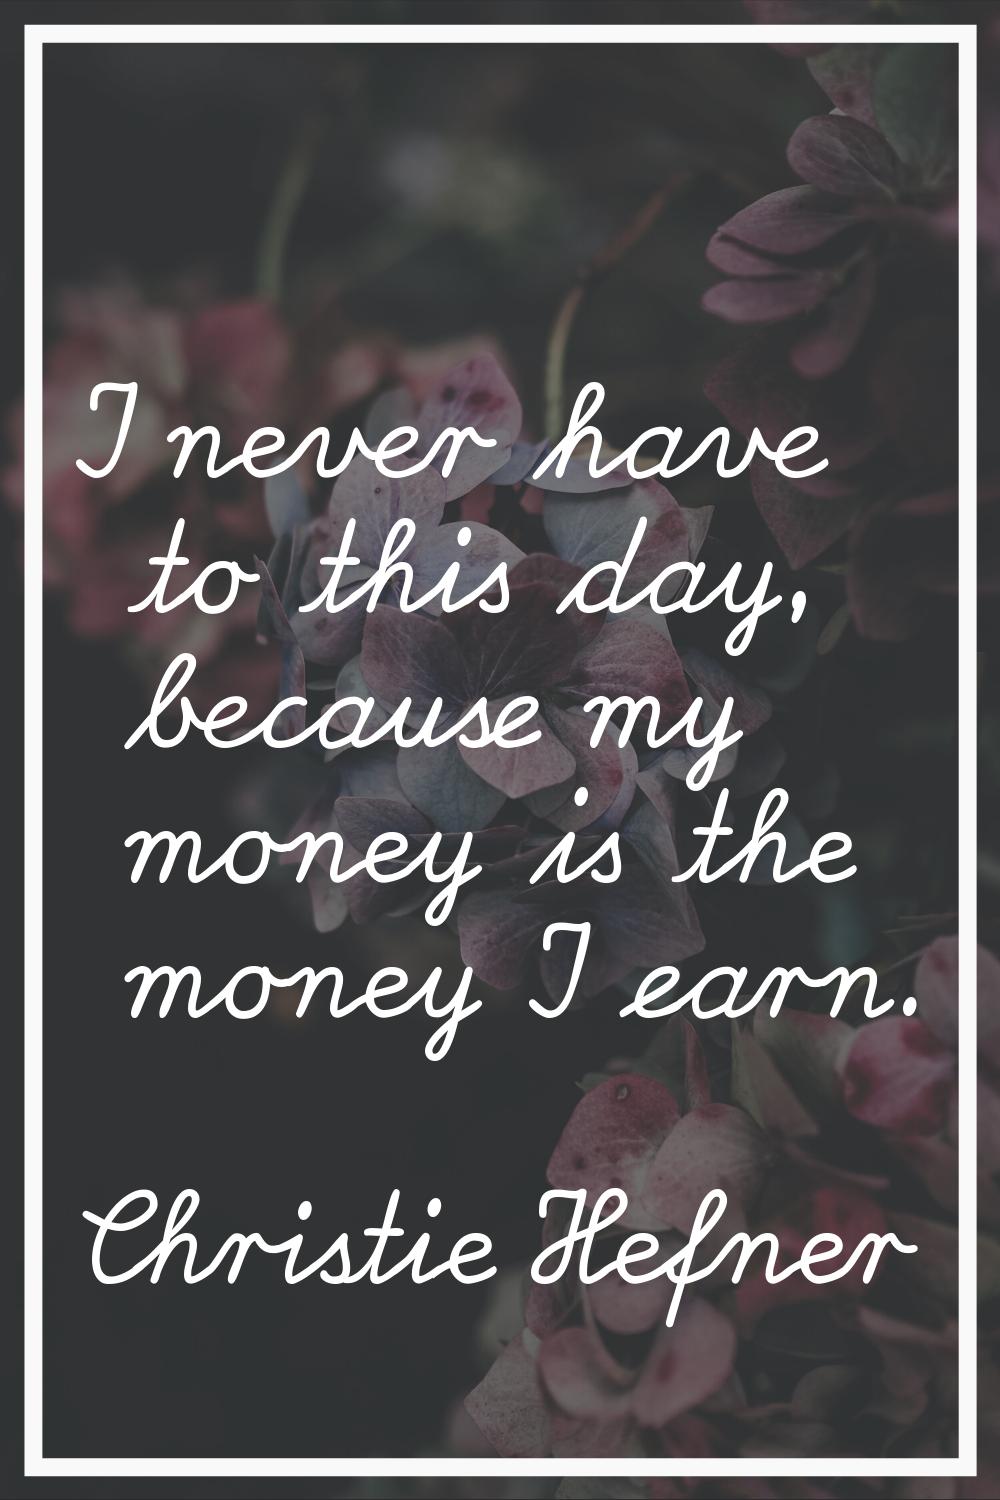 I never have to this day, because my money is the money I earn.